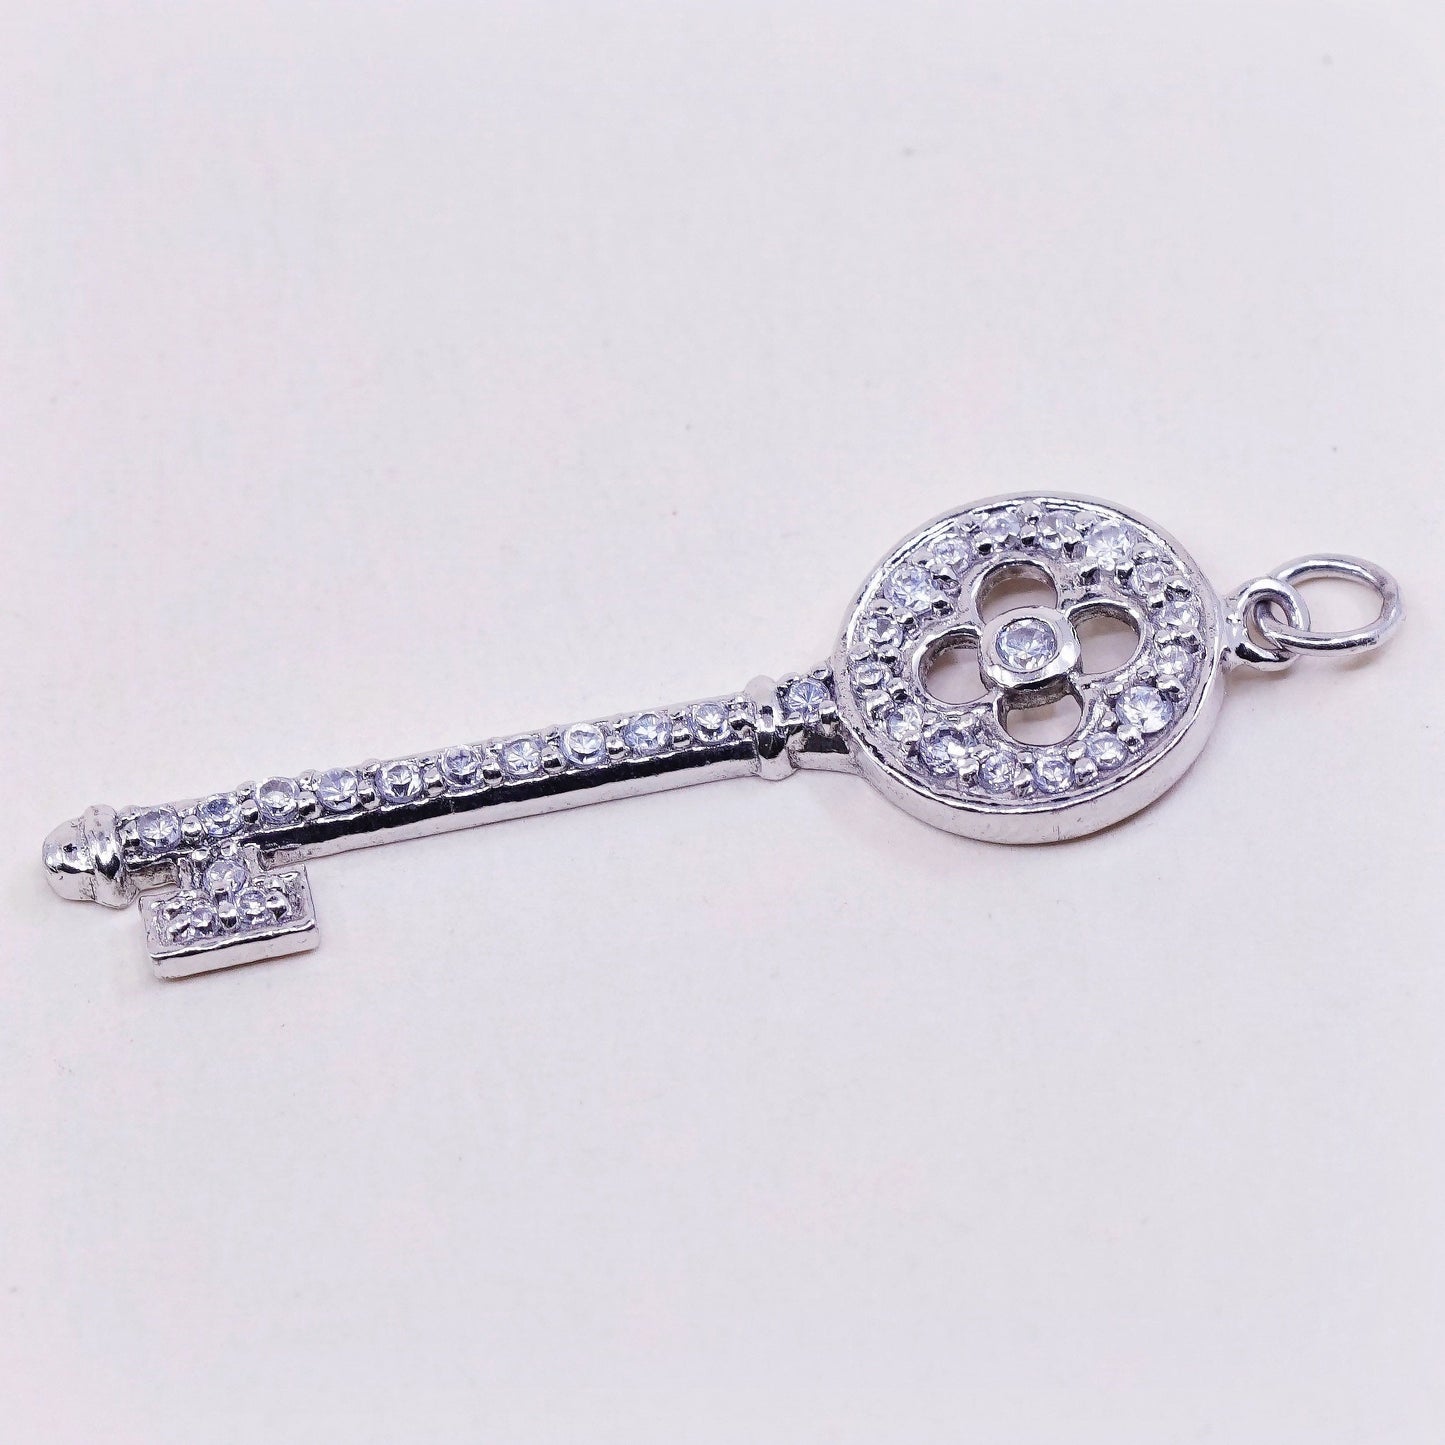 Vintage sterling silver key with cz crystal pendant, 925 silver charm